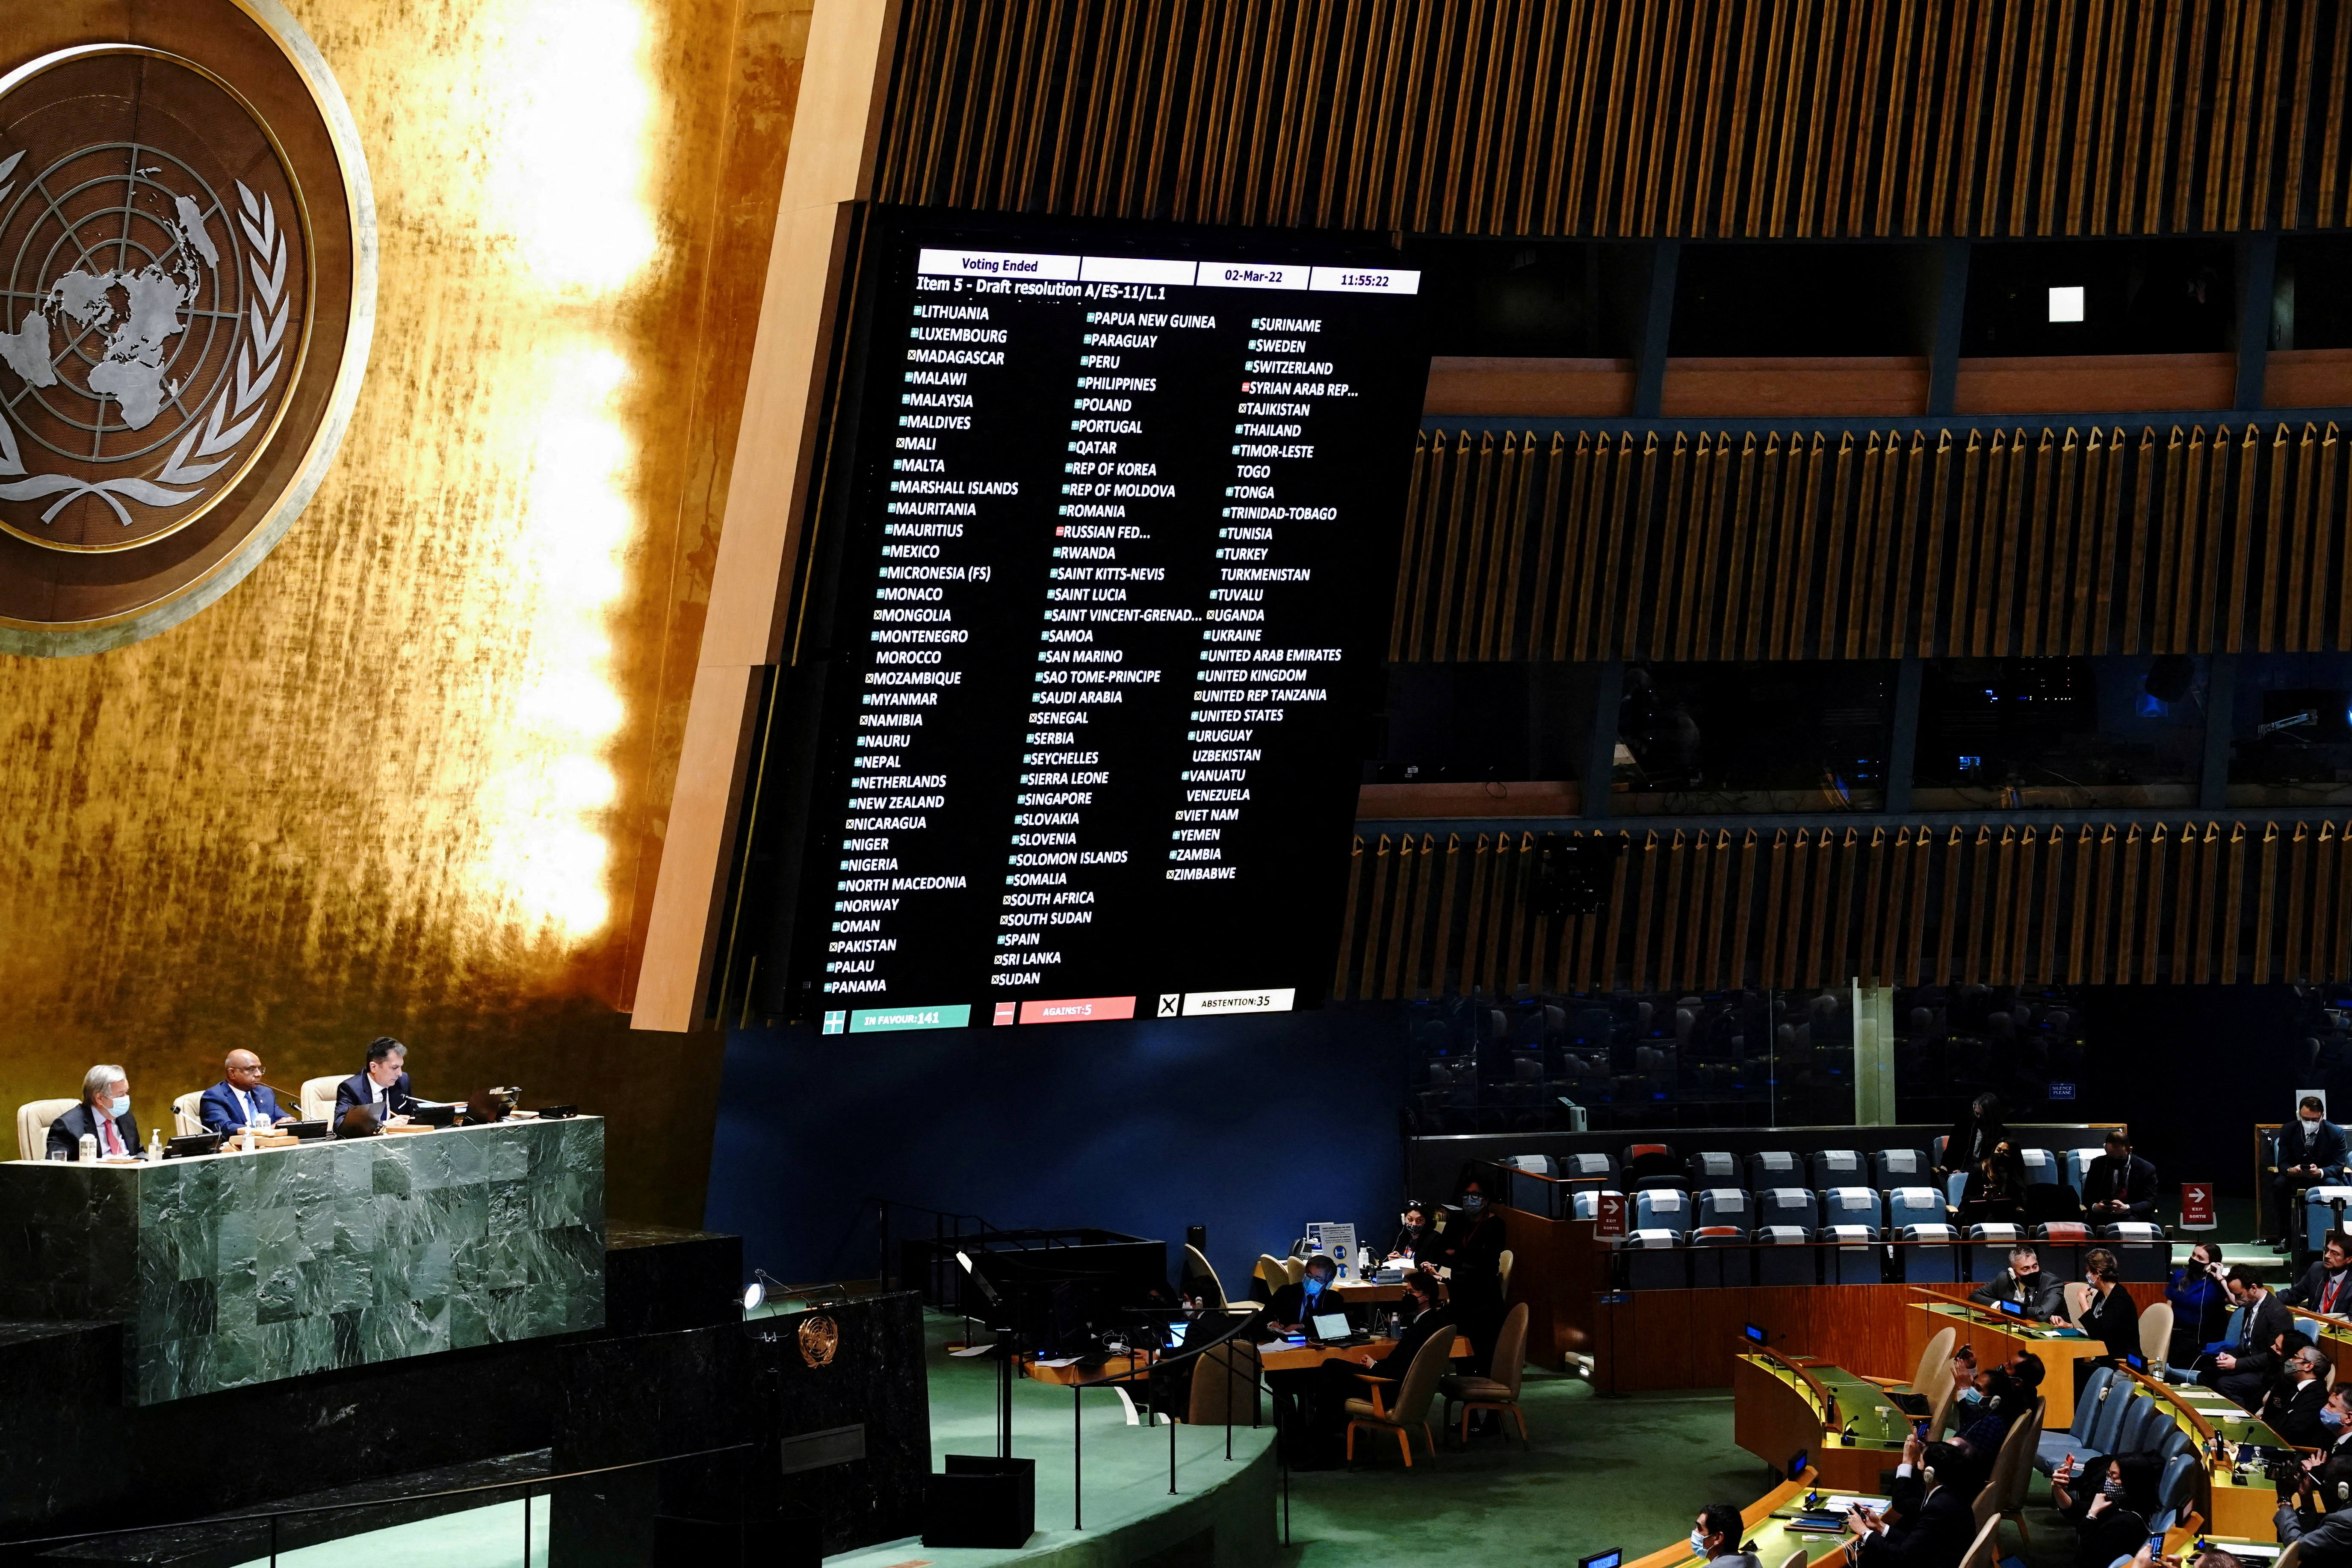 11th emergency special session of the U.N. General Assembly on Russia's invasion of Ukraine, in New York City